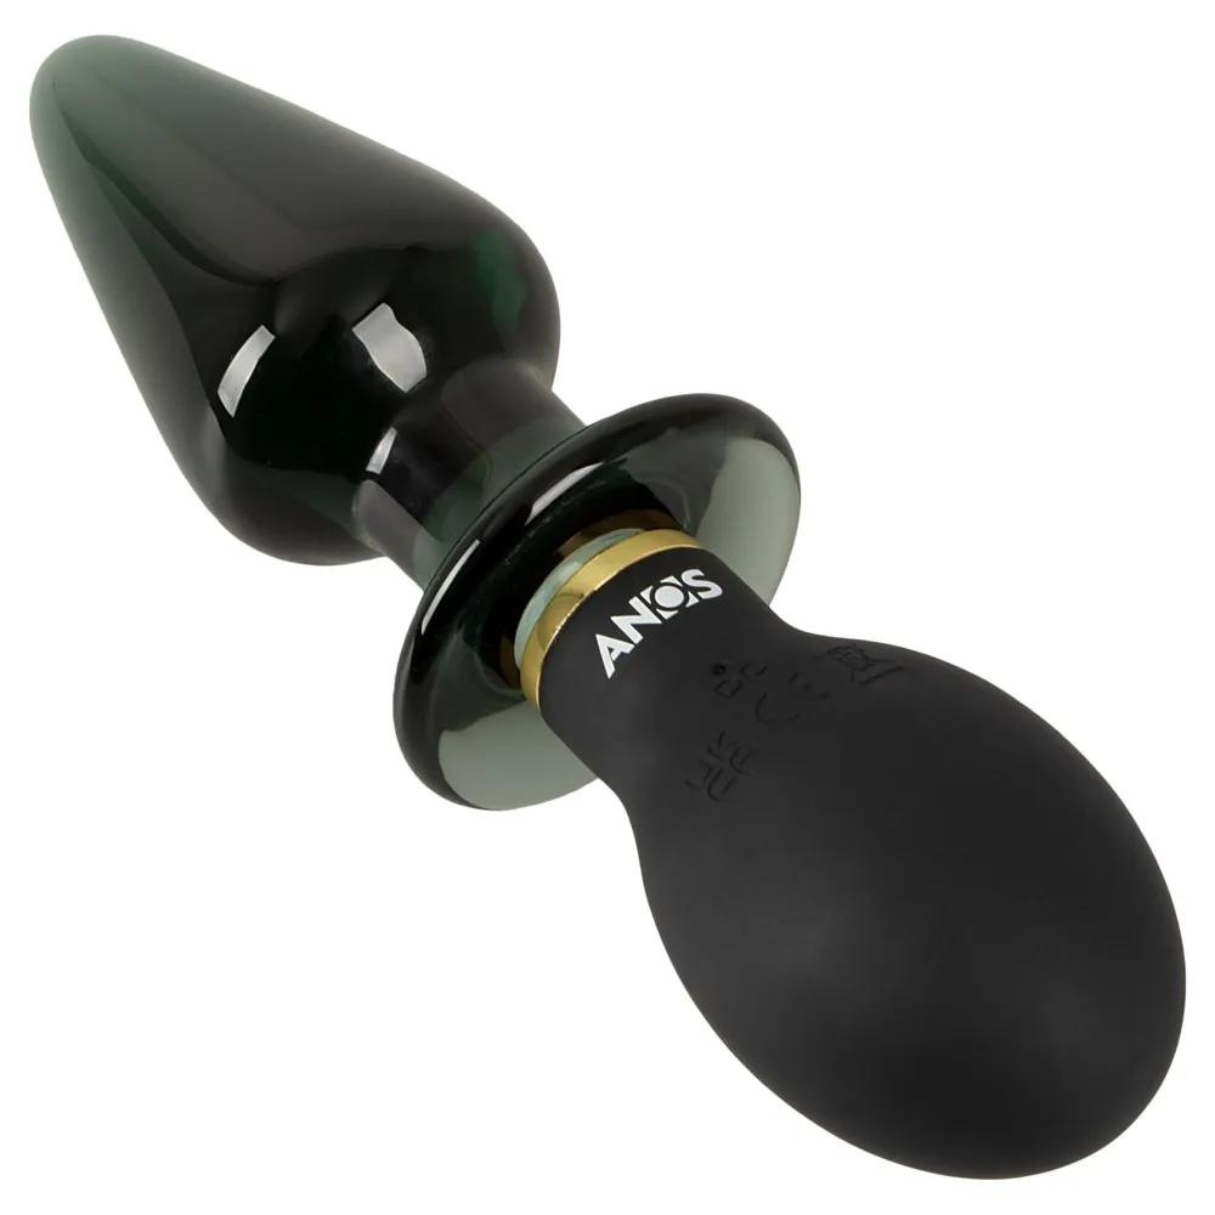 ORION with Vibrator Double-ended Plug Butt Vibration